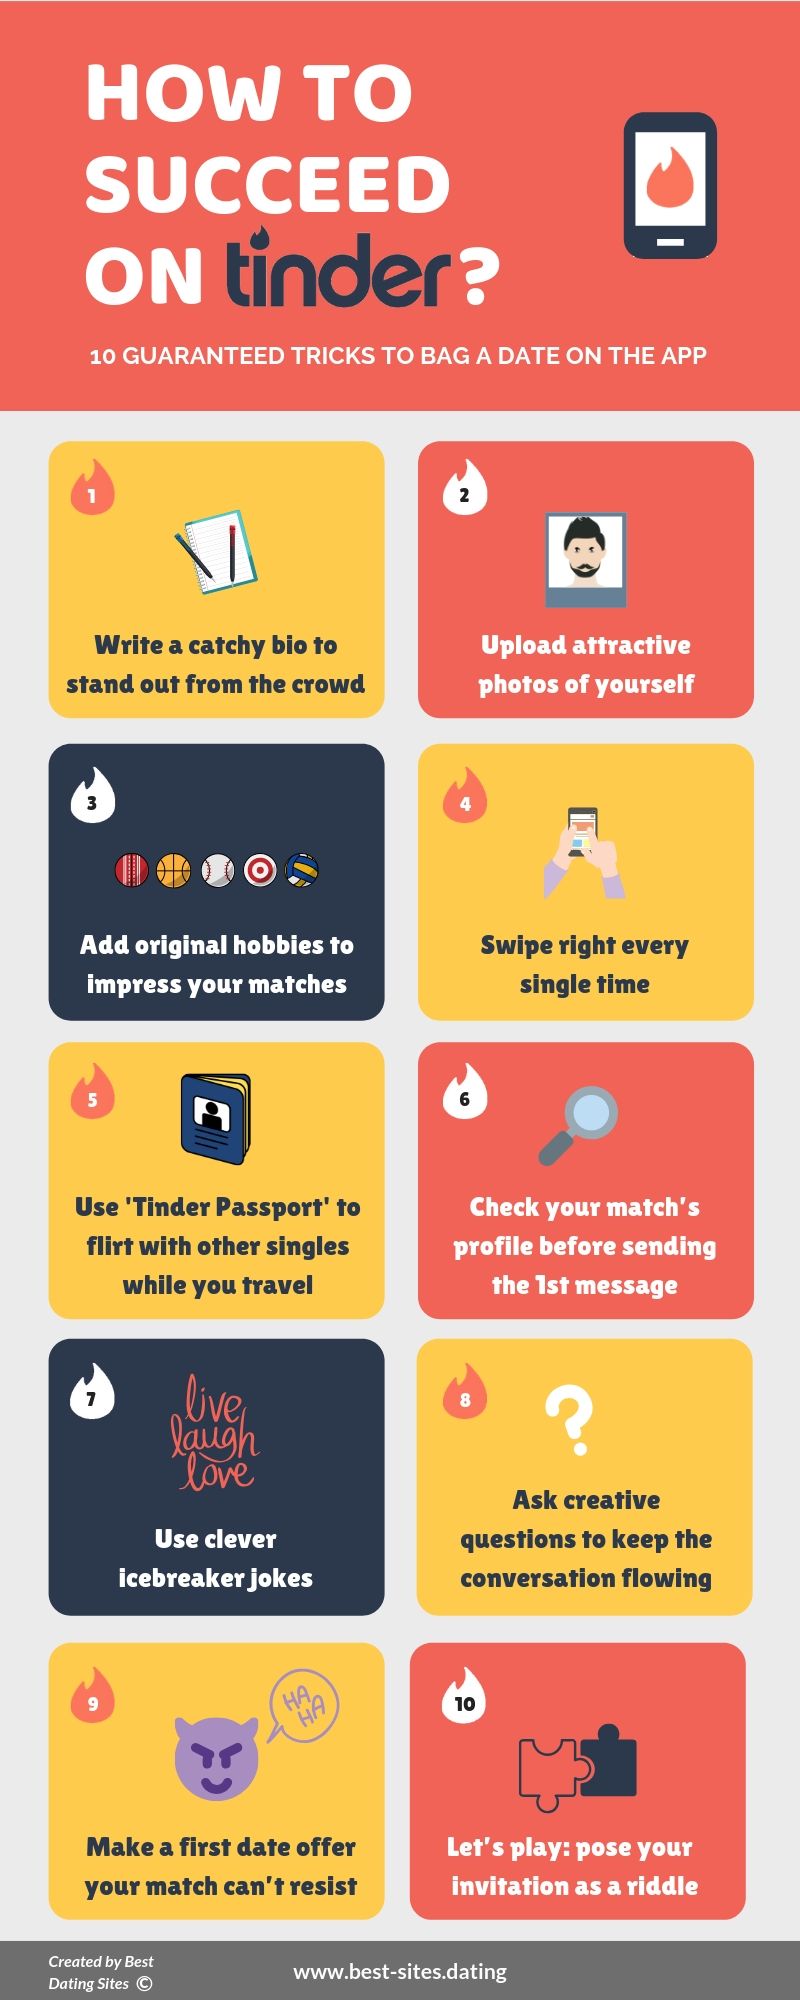 how to succeed on tinder 10 tricks infographic